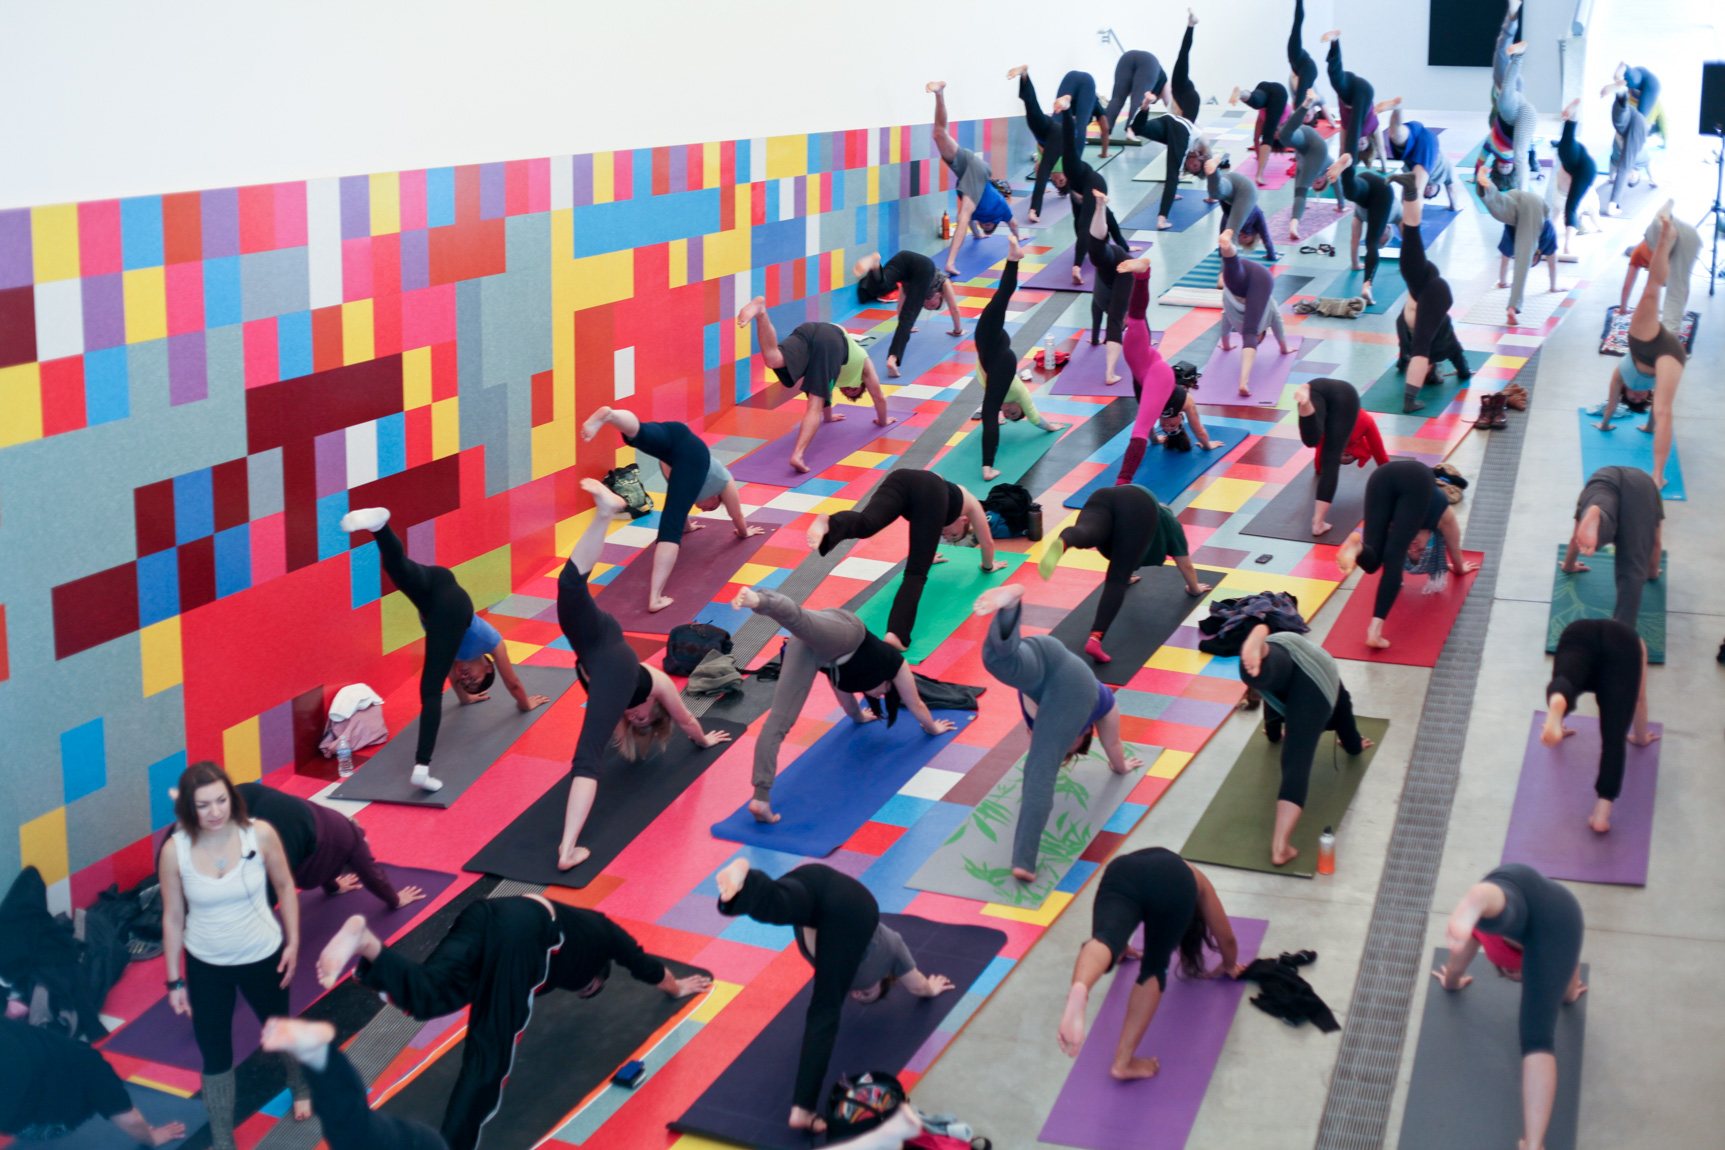 Laurie Brockhaus instructs yoga participants in the Main Gallery in downward dog poses, with their back leg lifted in the air.